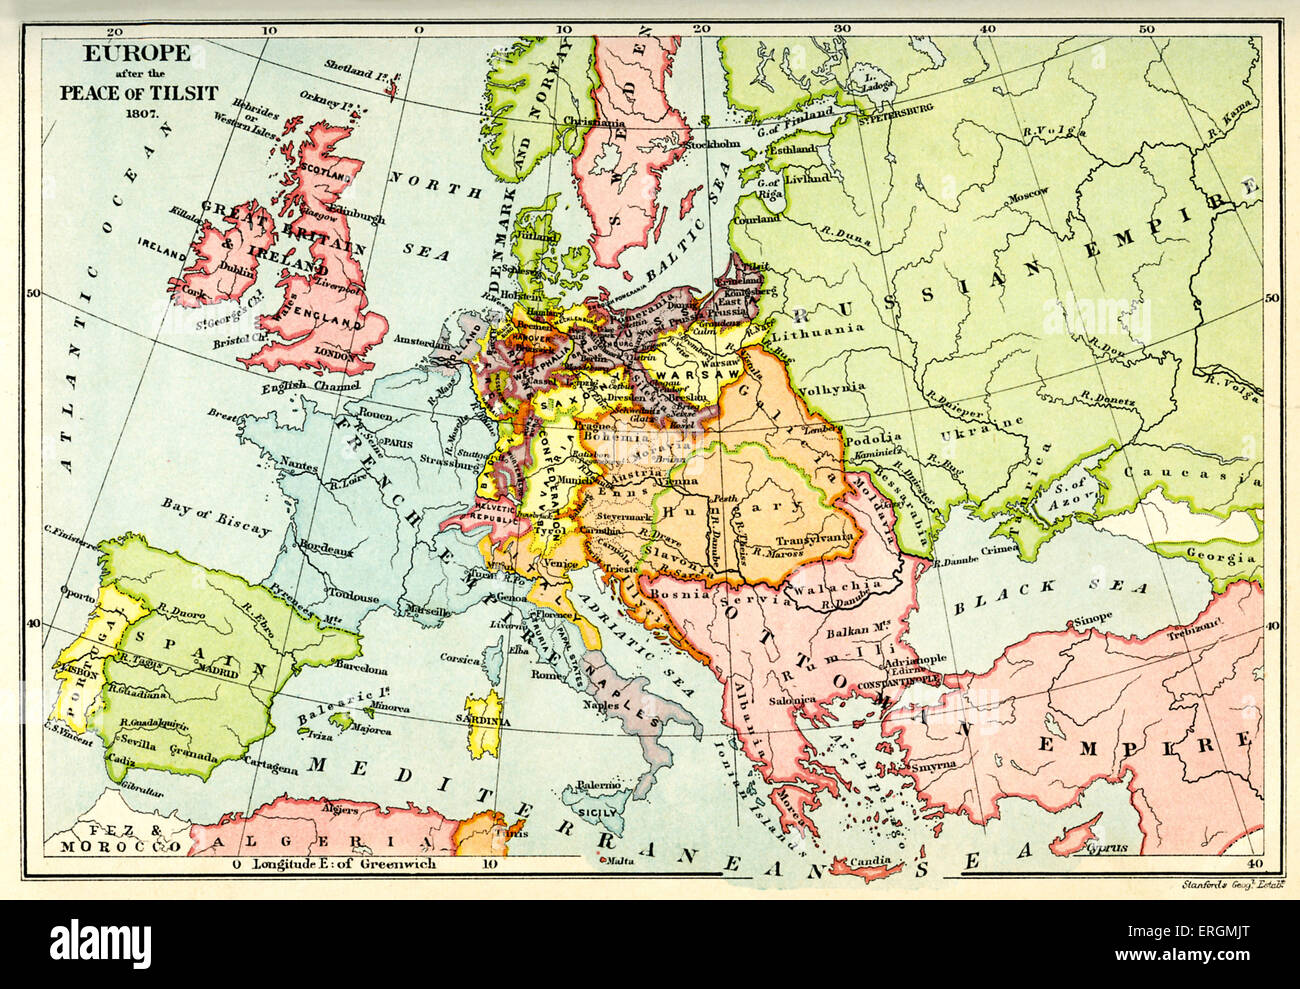 Europe after the Peace of Tilsit (1807). The Peace of Tilsit was signed between Russia and France. Stock Photo